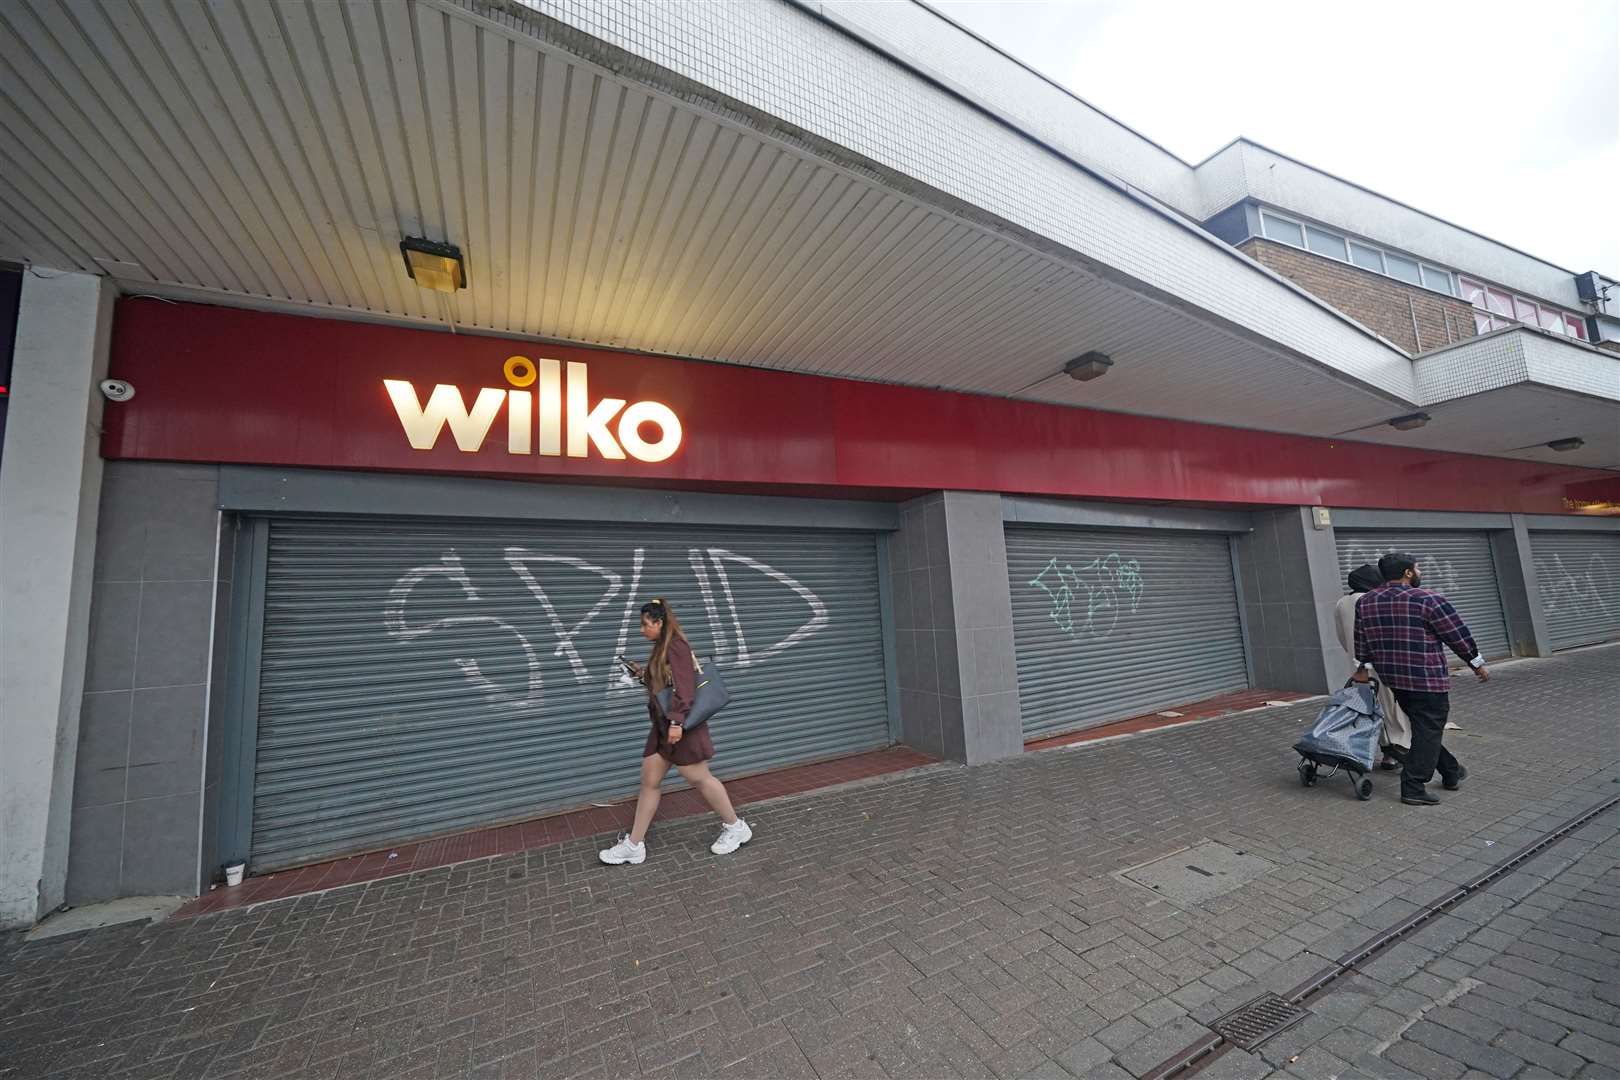 People walk past the closed Wilko store in Barking, east London, after its final day of trading on Tuesday (Yui Mok/PA)